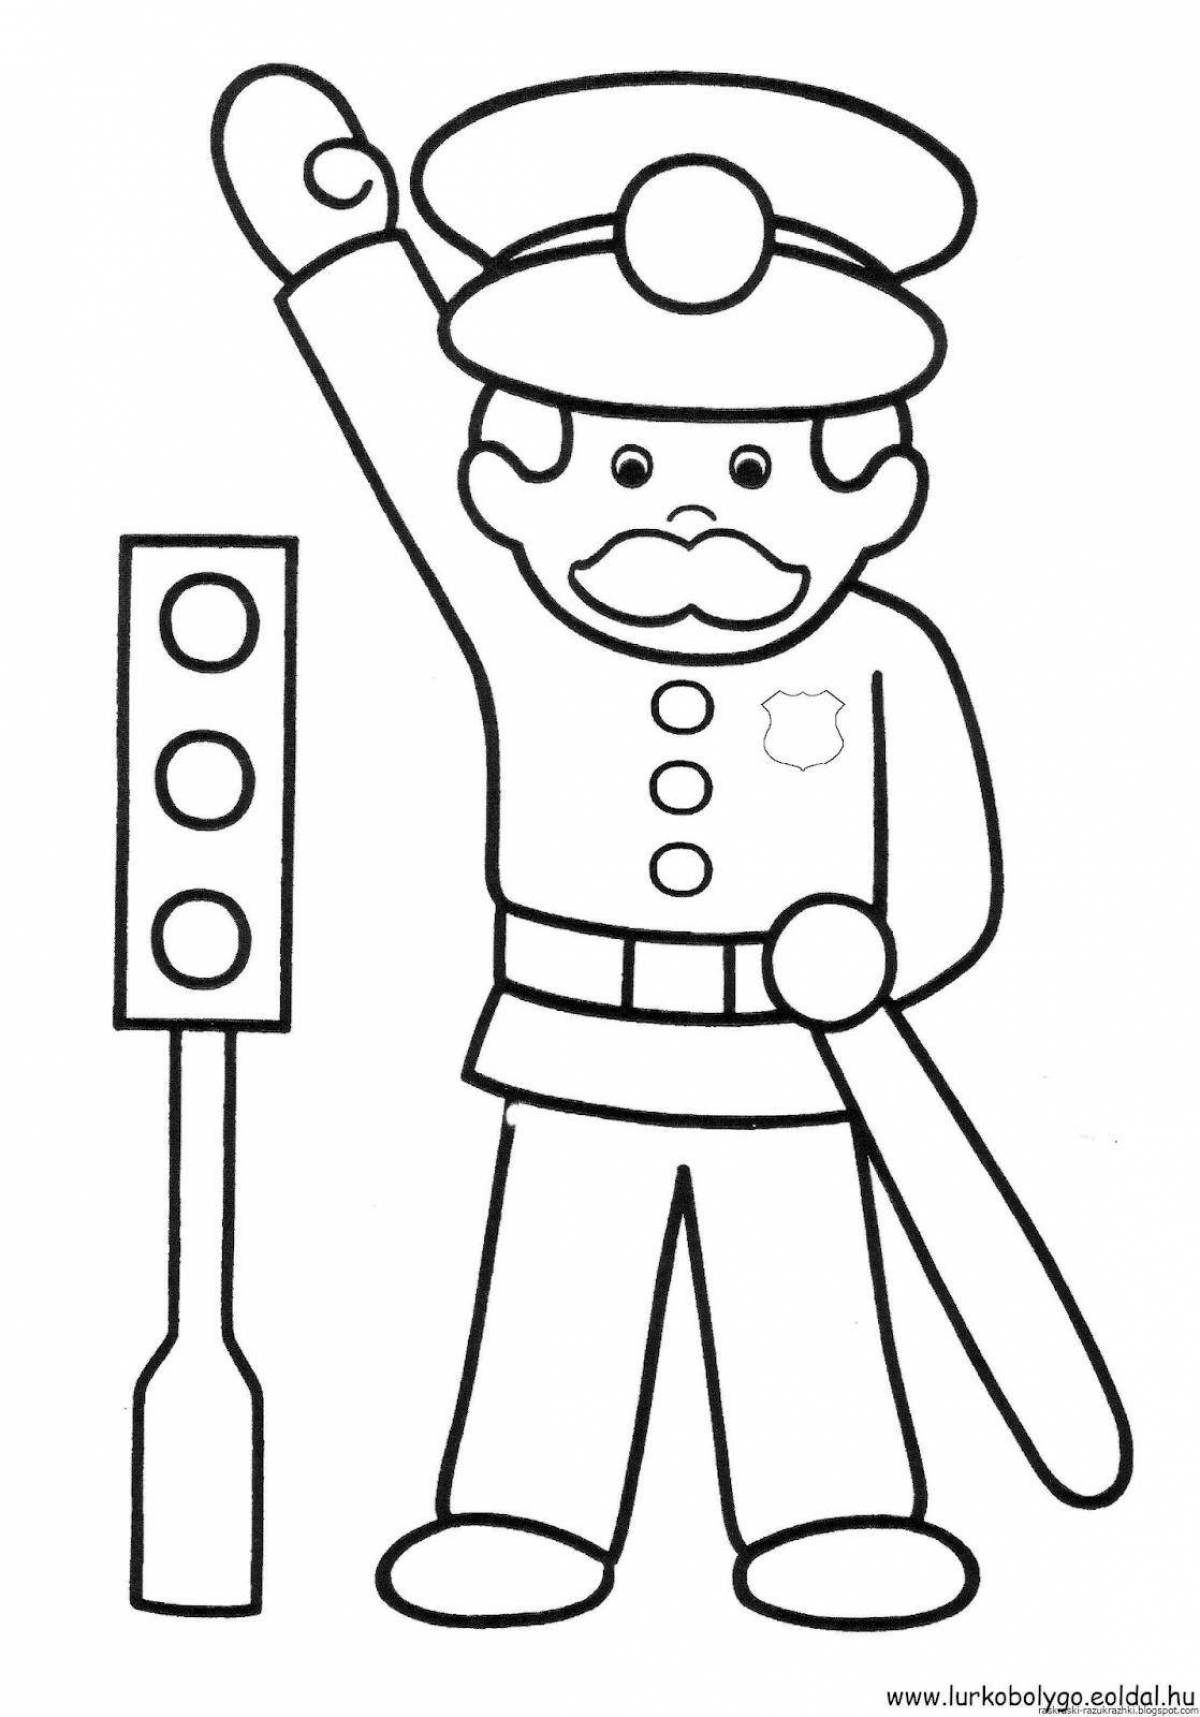 Colorful coloring page for kids